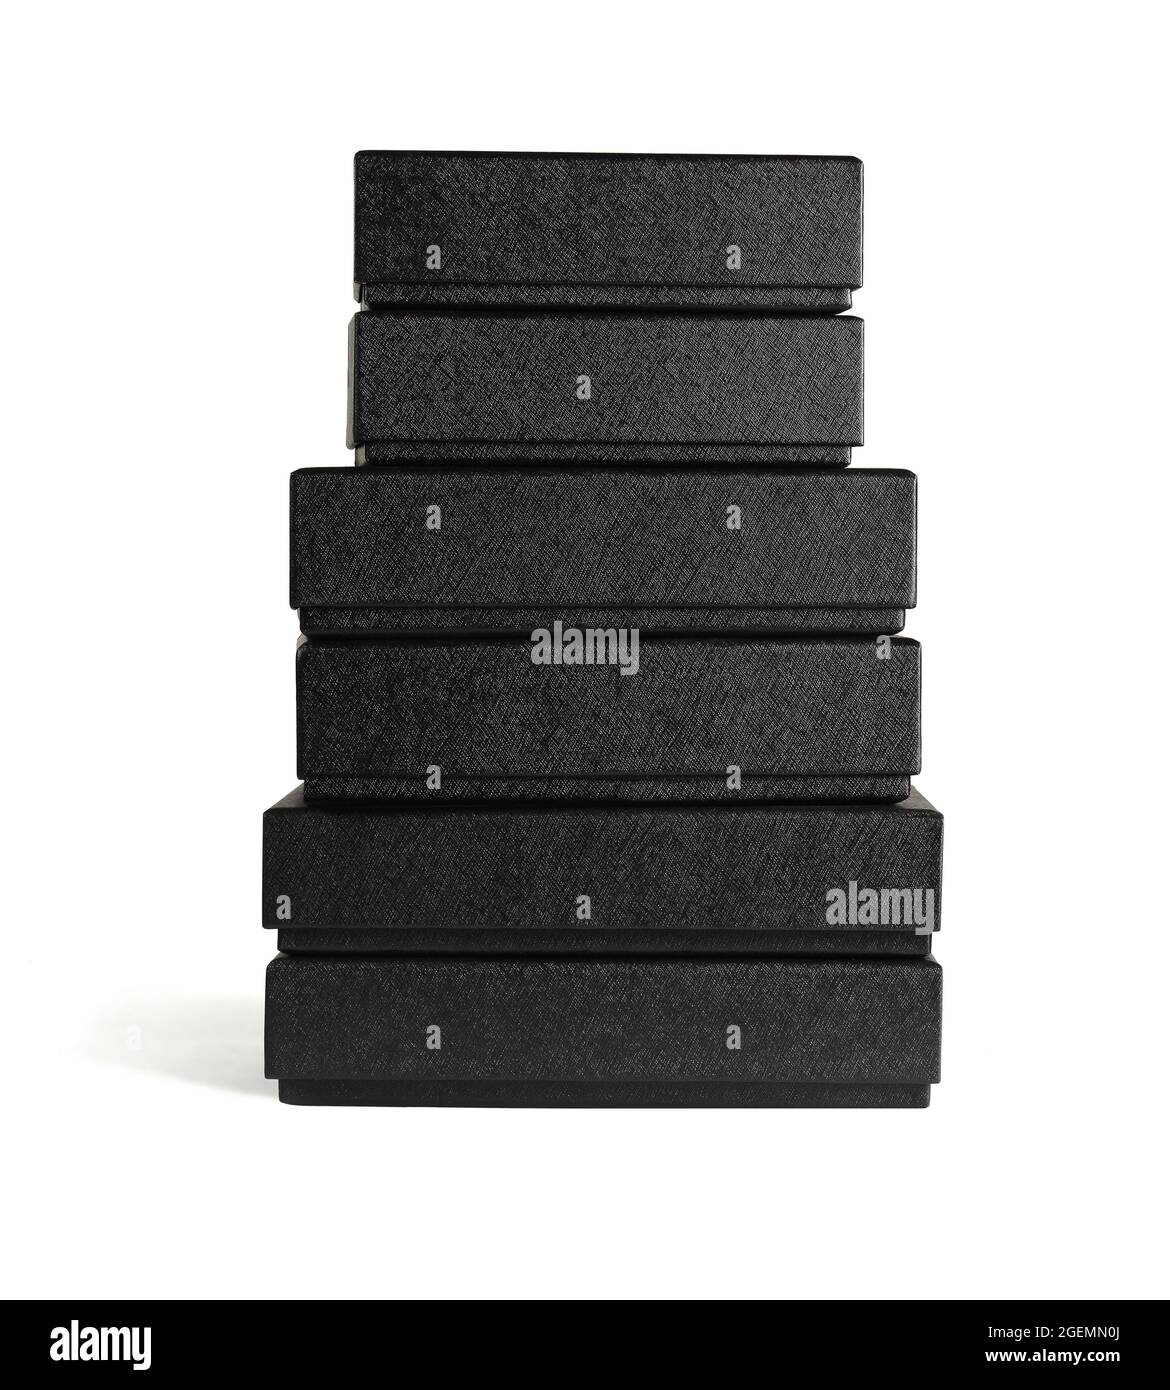 Stack of Assorted Black Cardboard Boxes on White Bakground Stock Photo